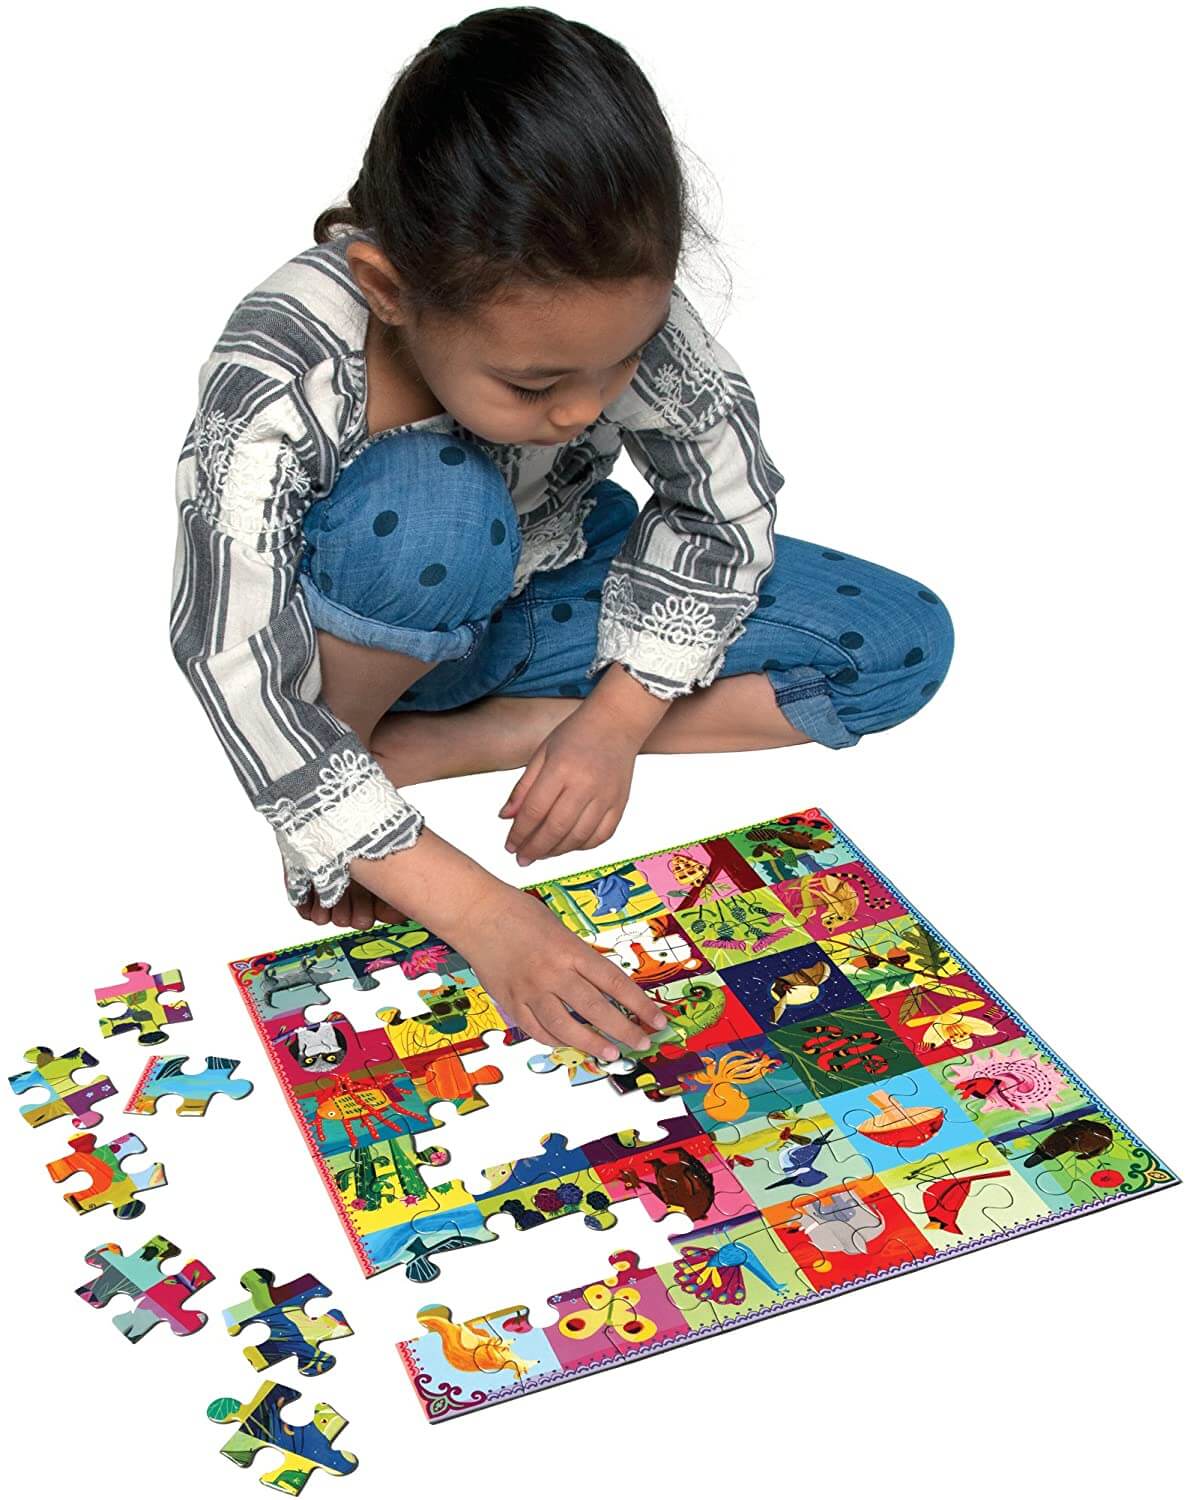 eeBoo - Portraits of Nature 64 Piece Jigsaw Puzzle for Kids photo of child assembling puzzle